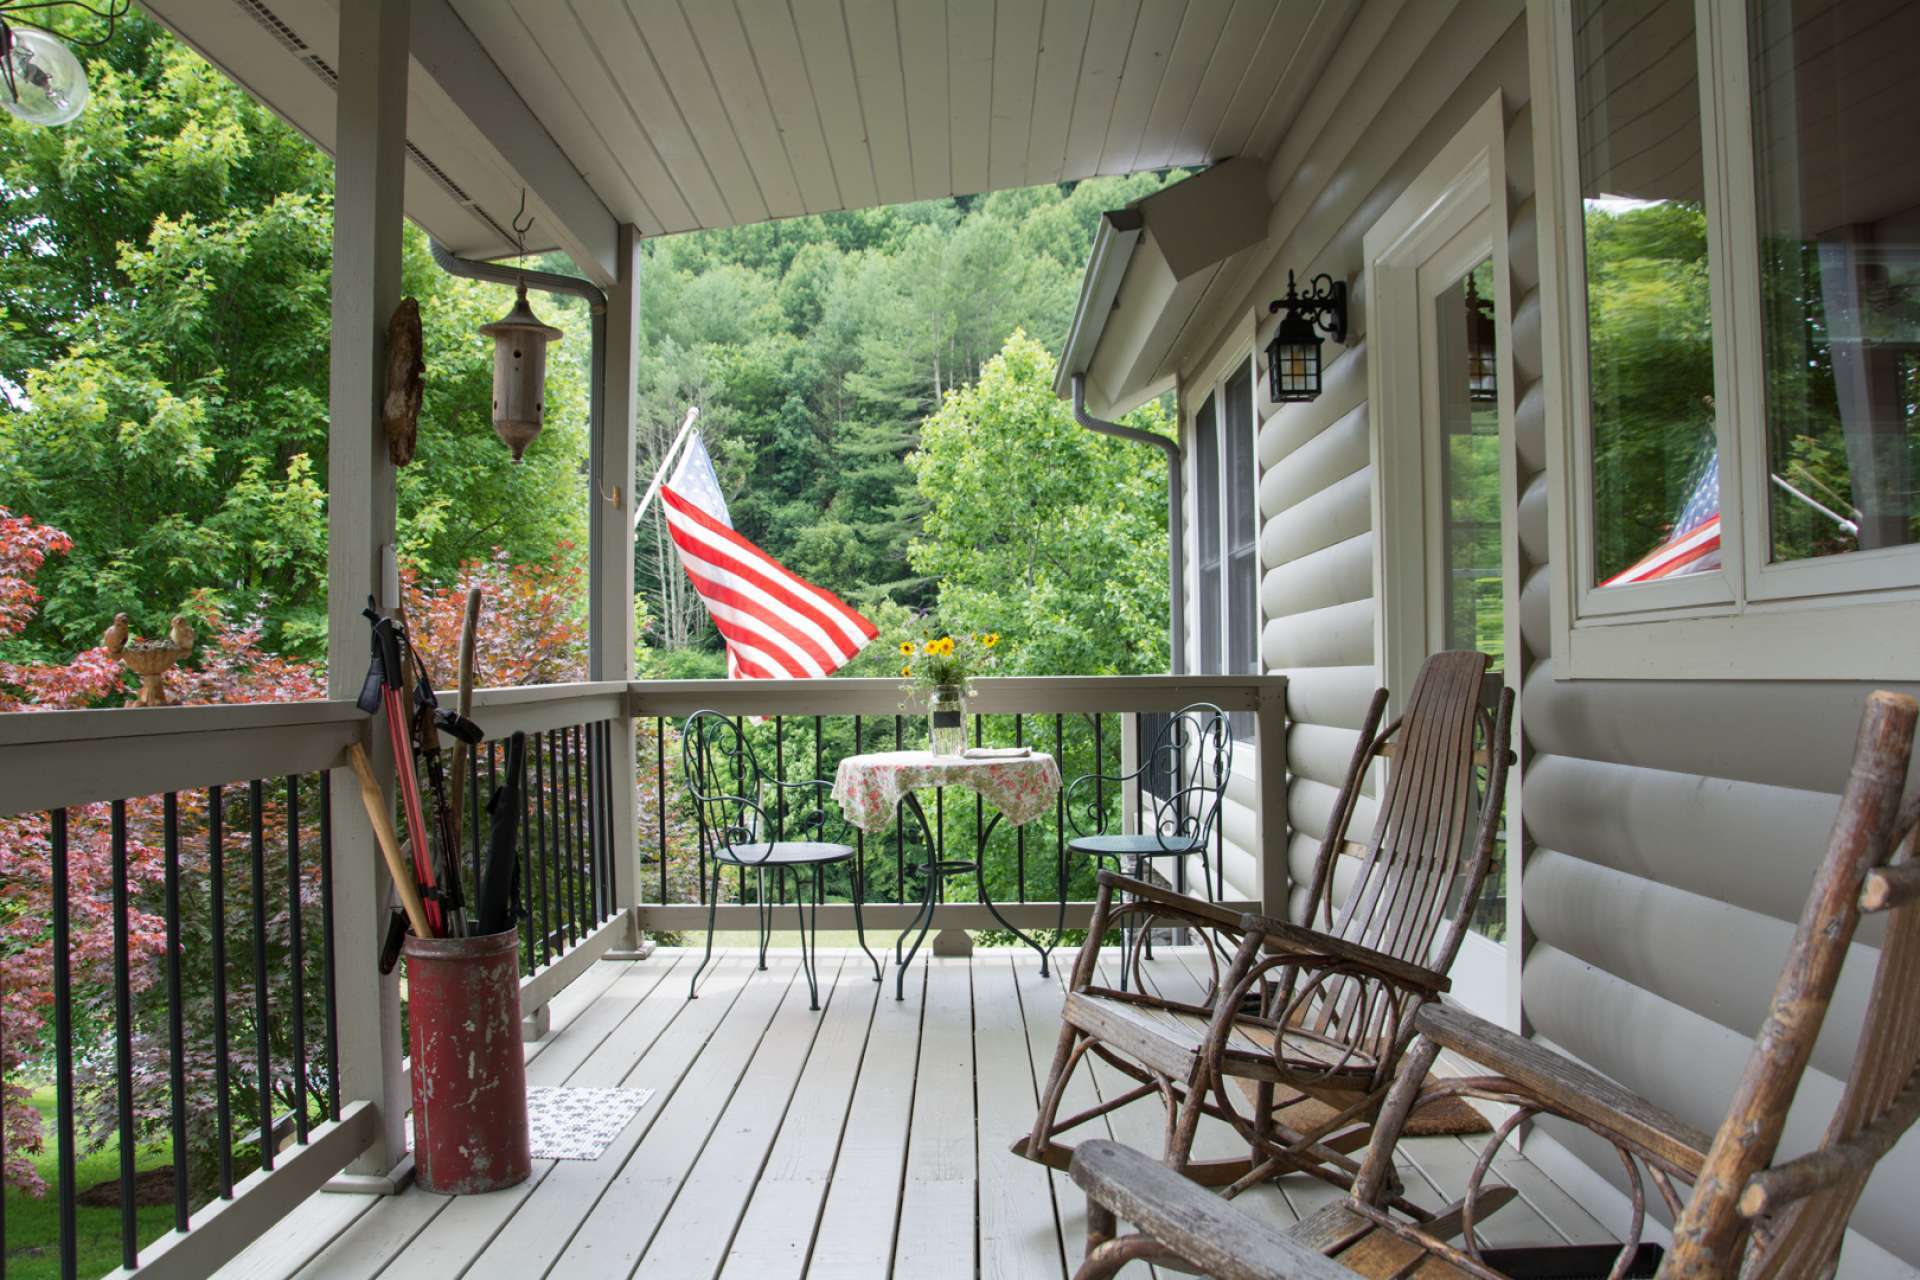 You will love the charismatic covered porch.